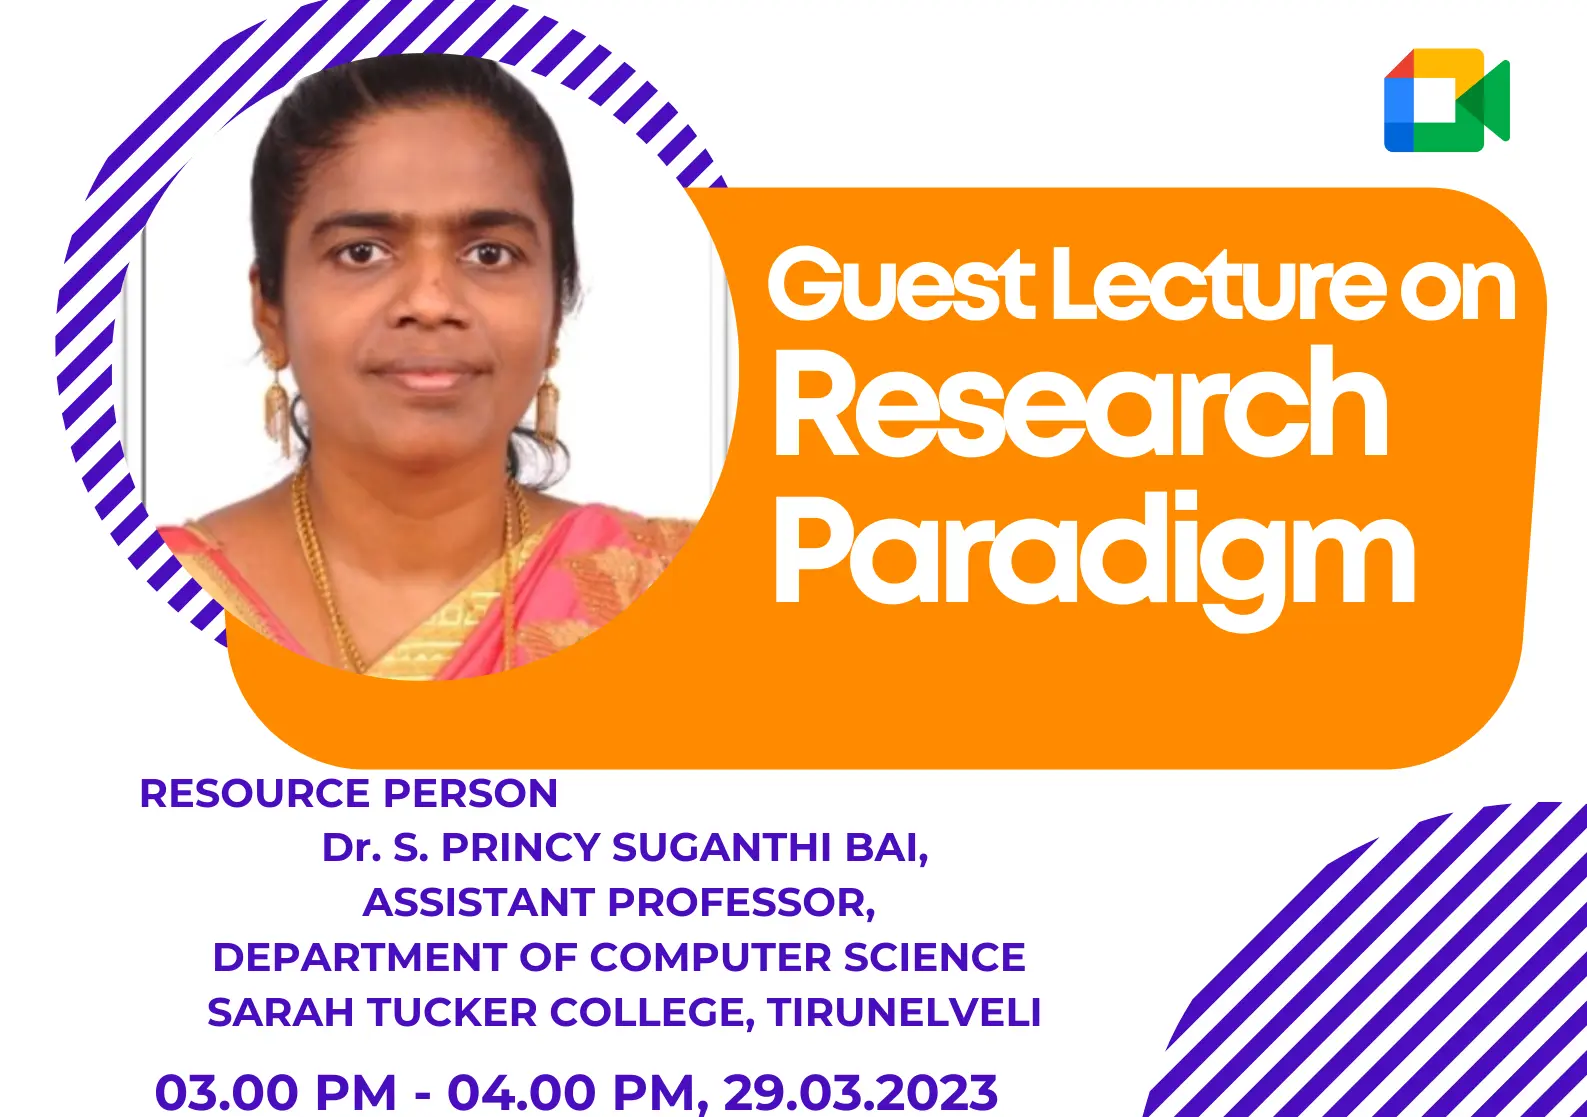 Guest Lecture on “Research Paradigm”